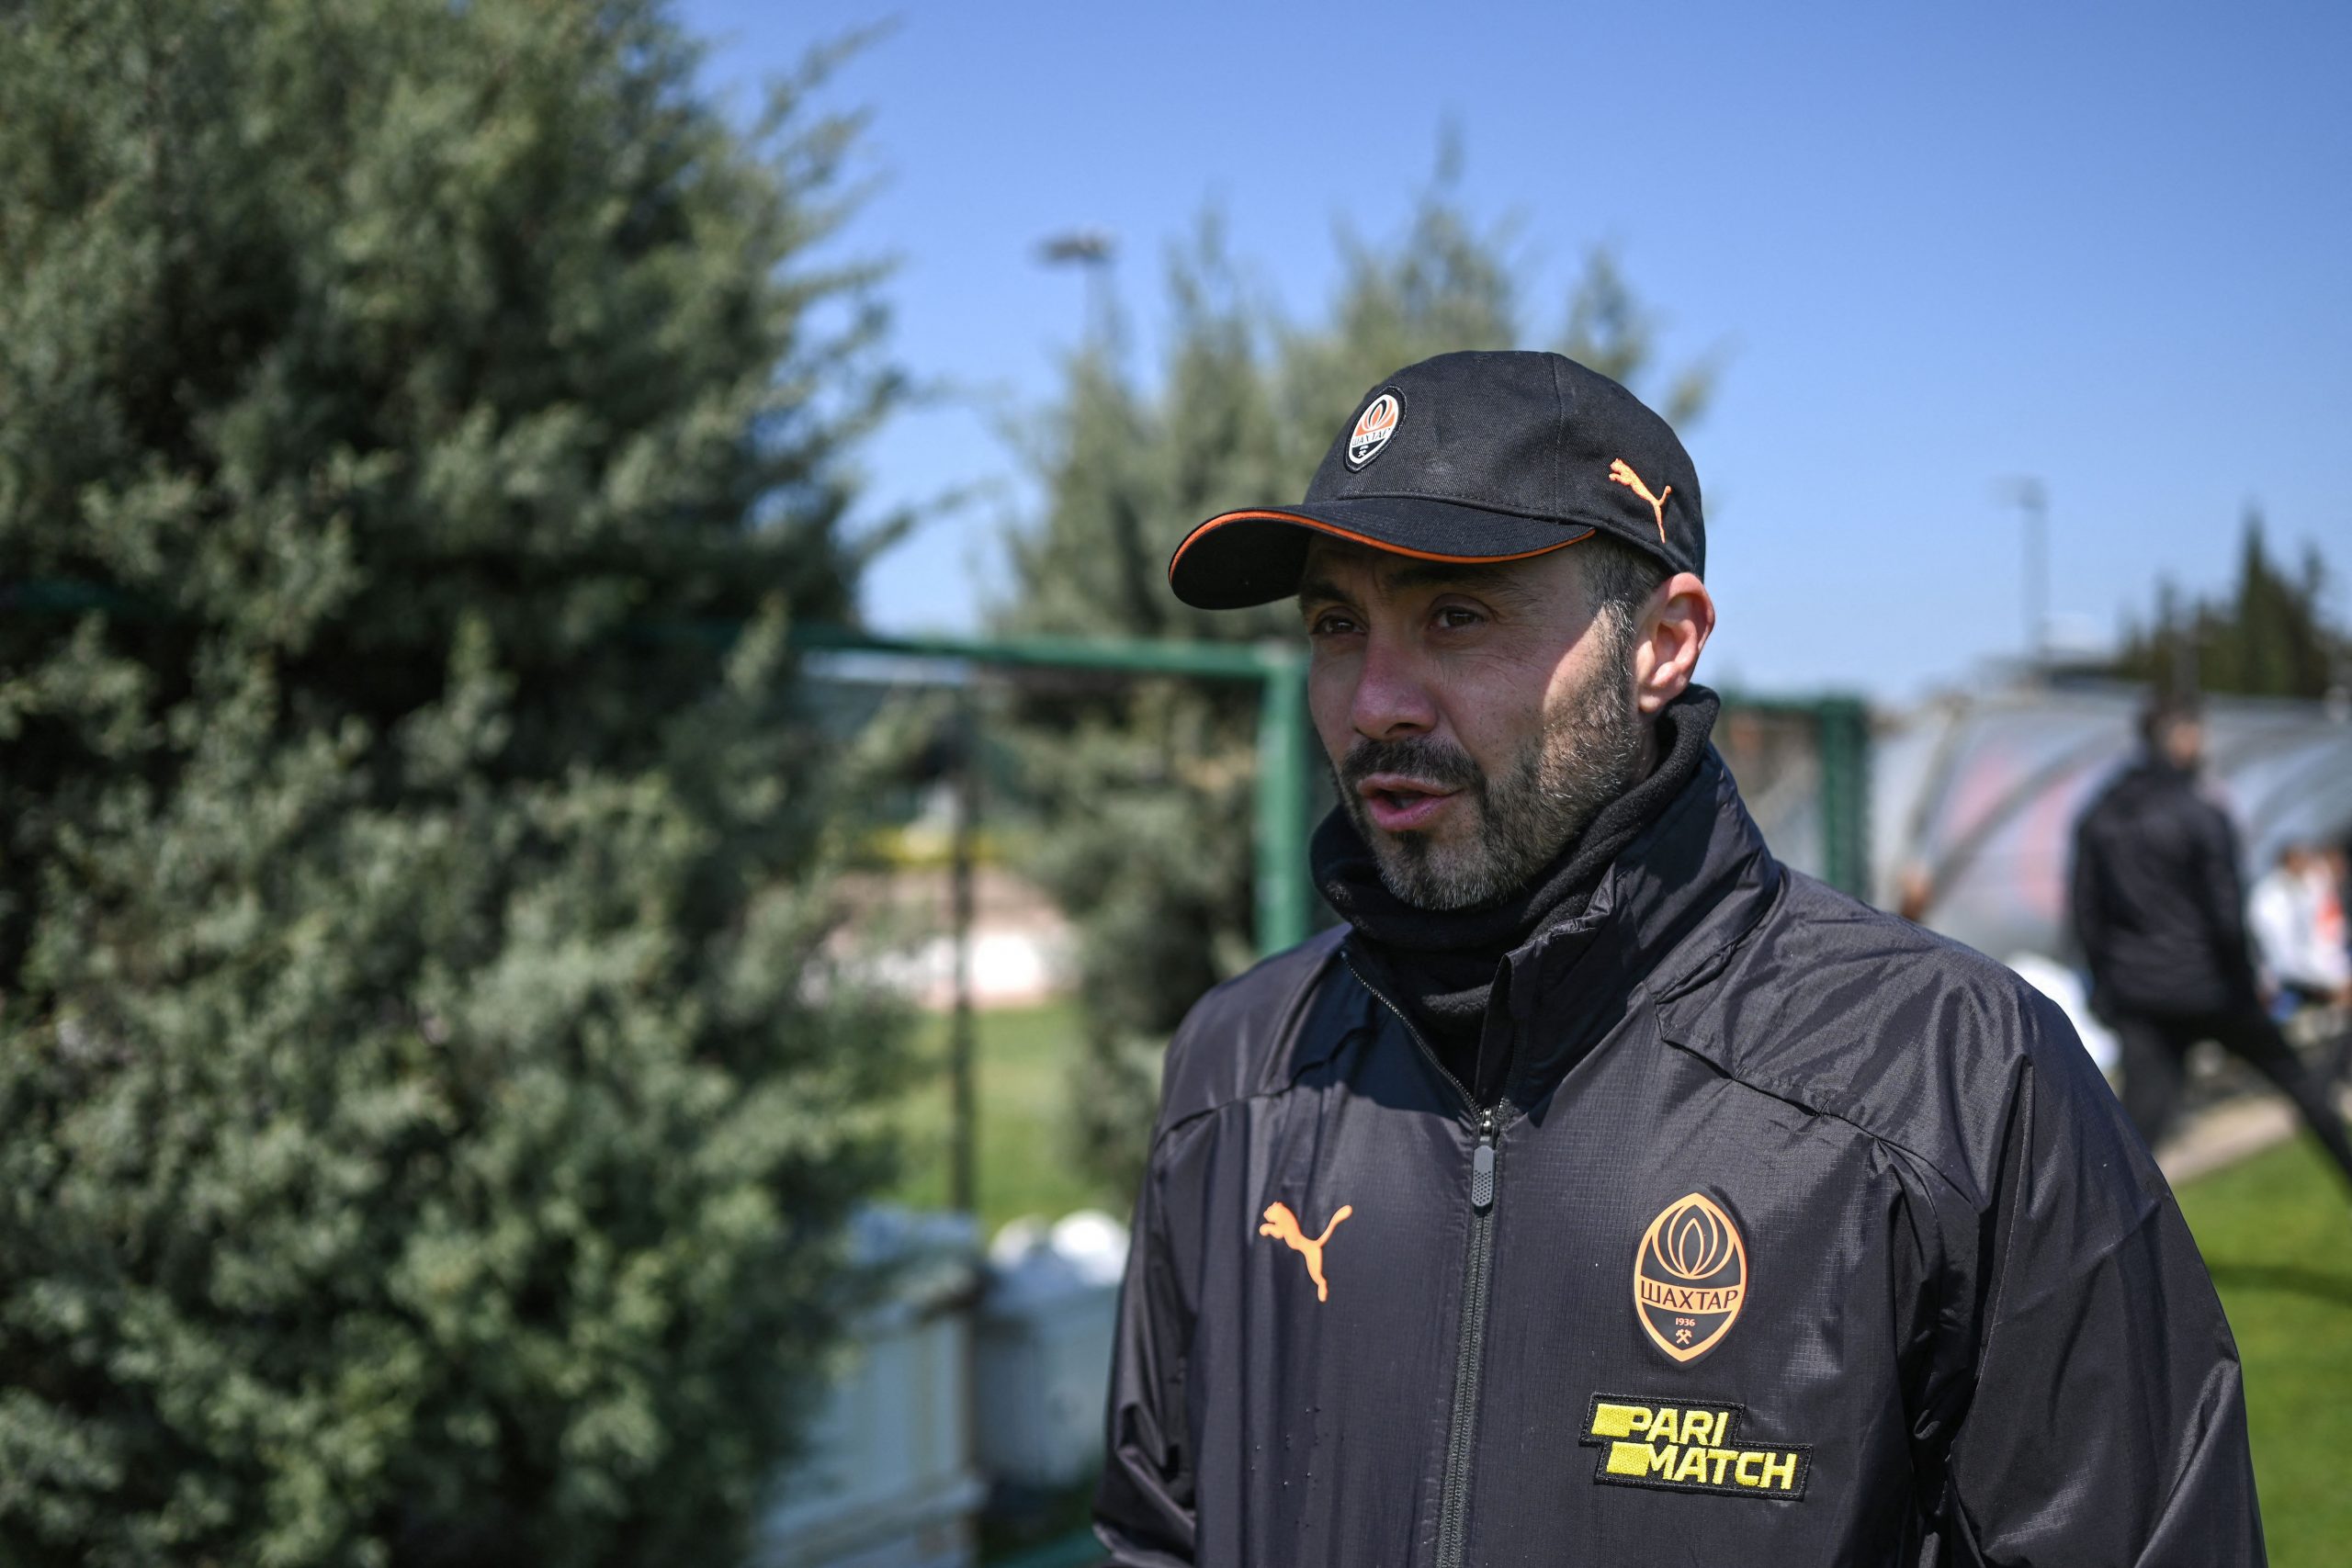 Roberto De Zerbi during his time as the manager of Shakhtar Donetsk. (Photo by OZAN KOSE/AFP via Getty Images)